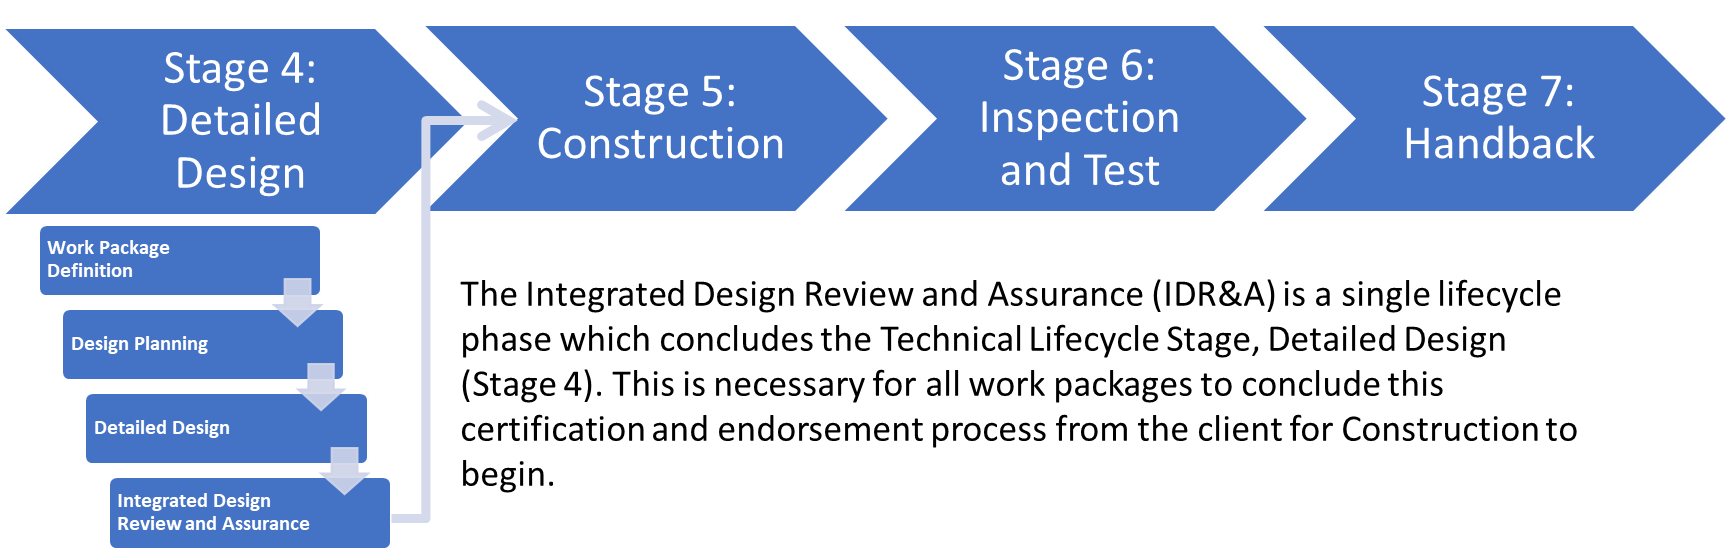 Diagram of the project technical lifecycle stages and the stage 4 lifecycle phases 